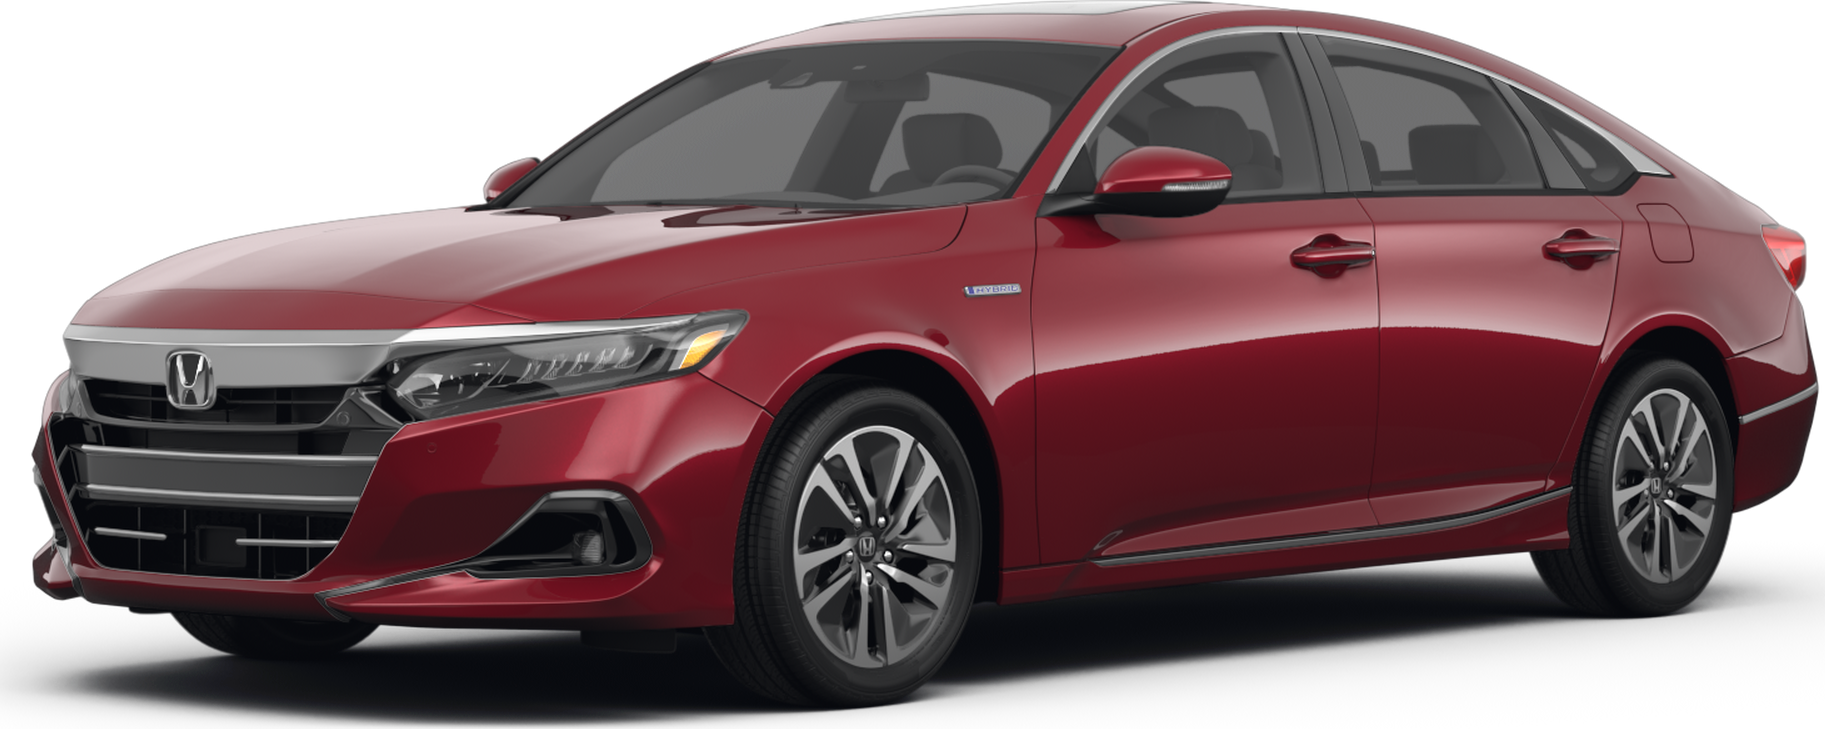 2022 Honda Accord Hybrid Price, Reviews, Pictures & More Kelley Blue Book